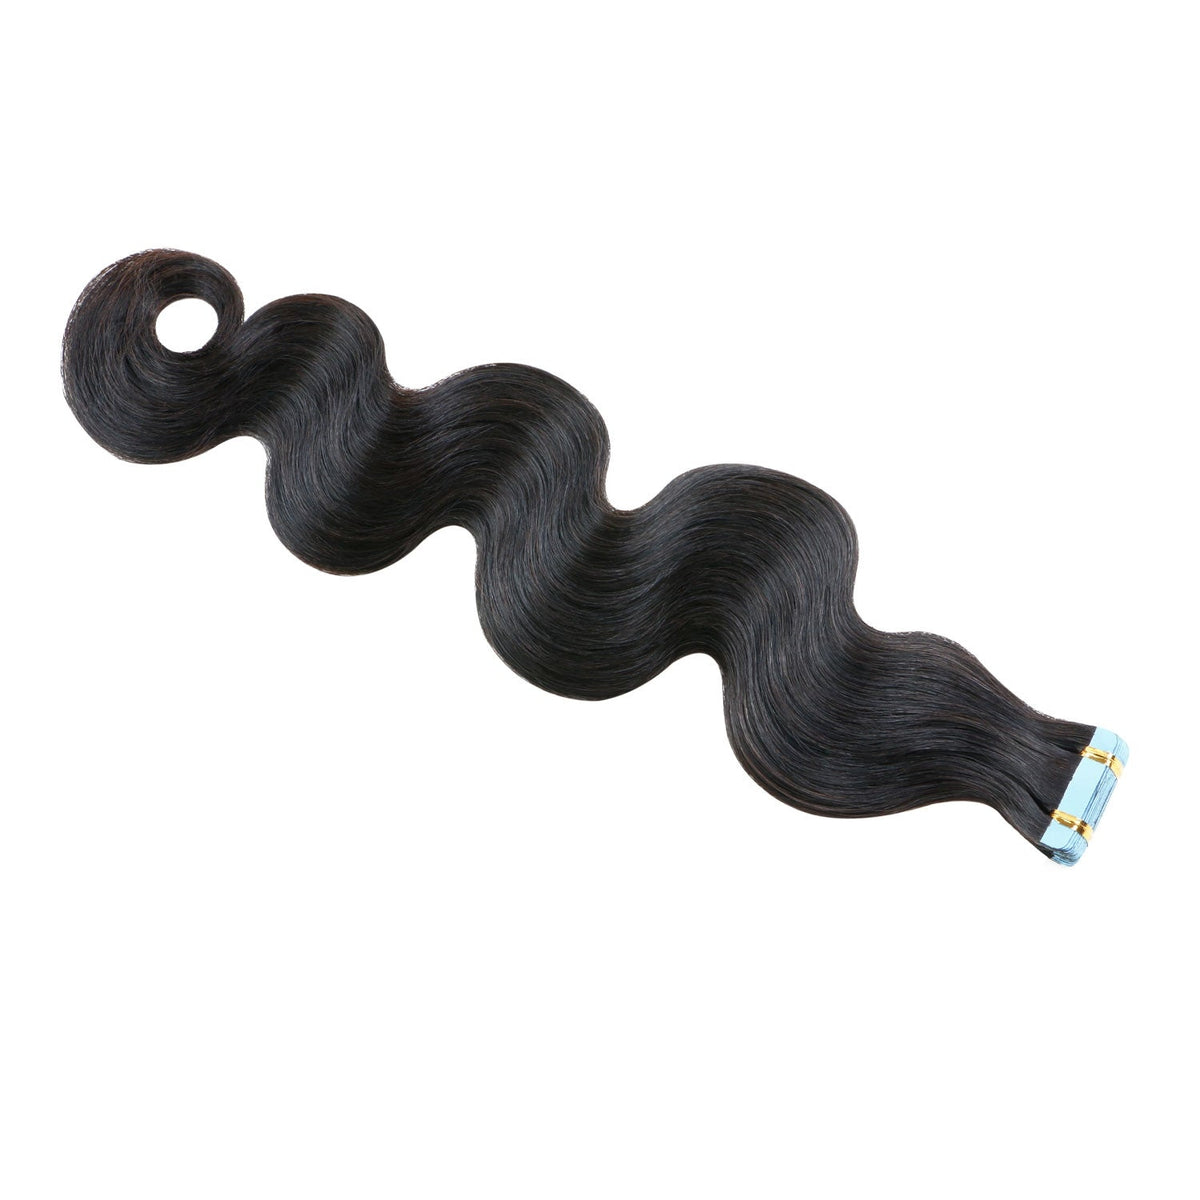 100% human hair tape-in extensions 50g/20 pcs